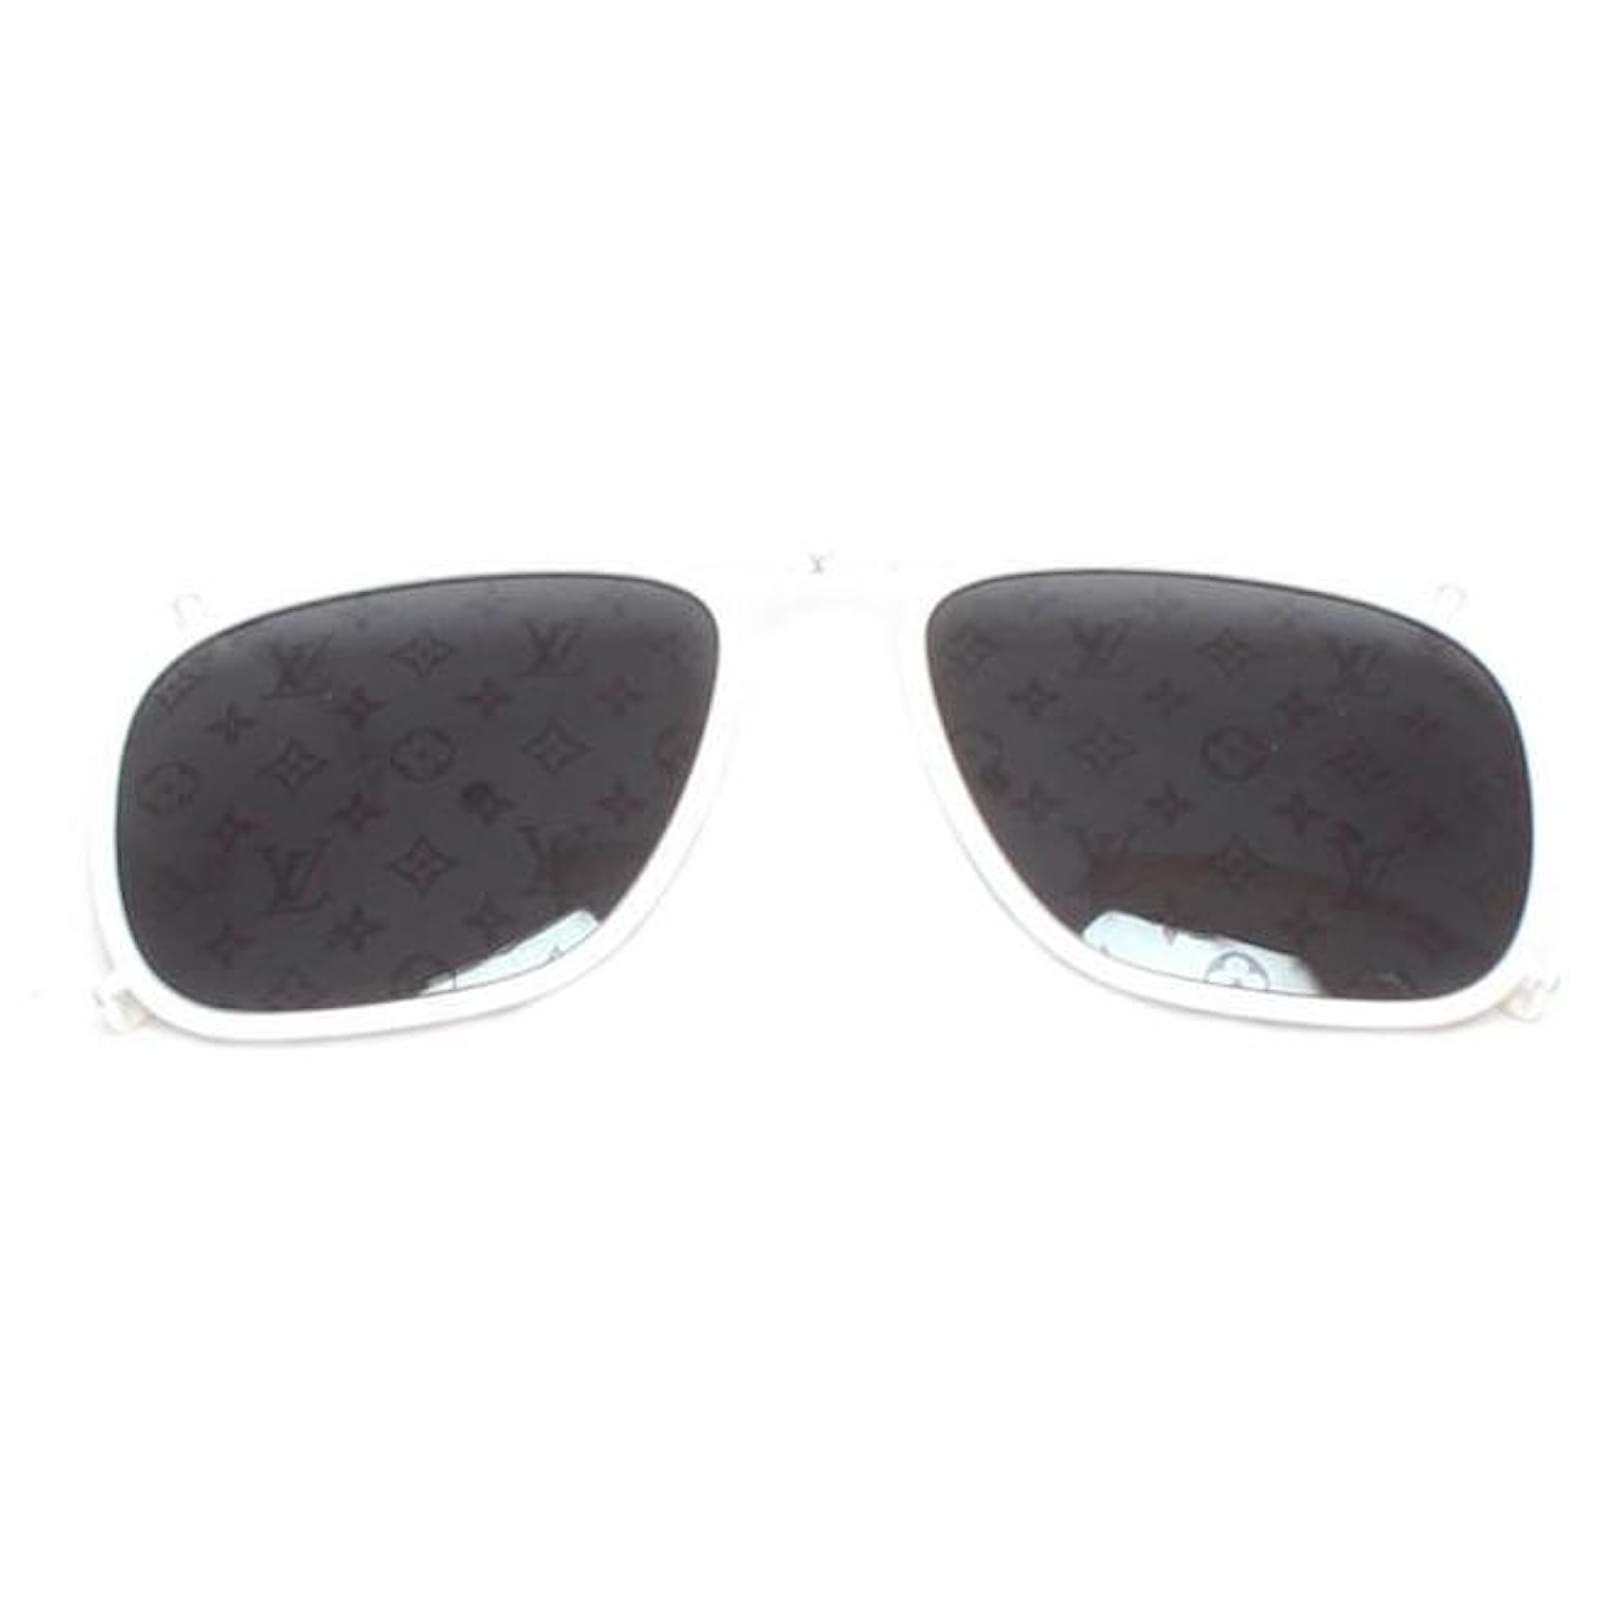 Louis Vuitton aviator Sunglasses with monogram lens. If only I